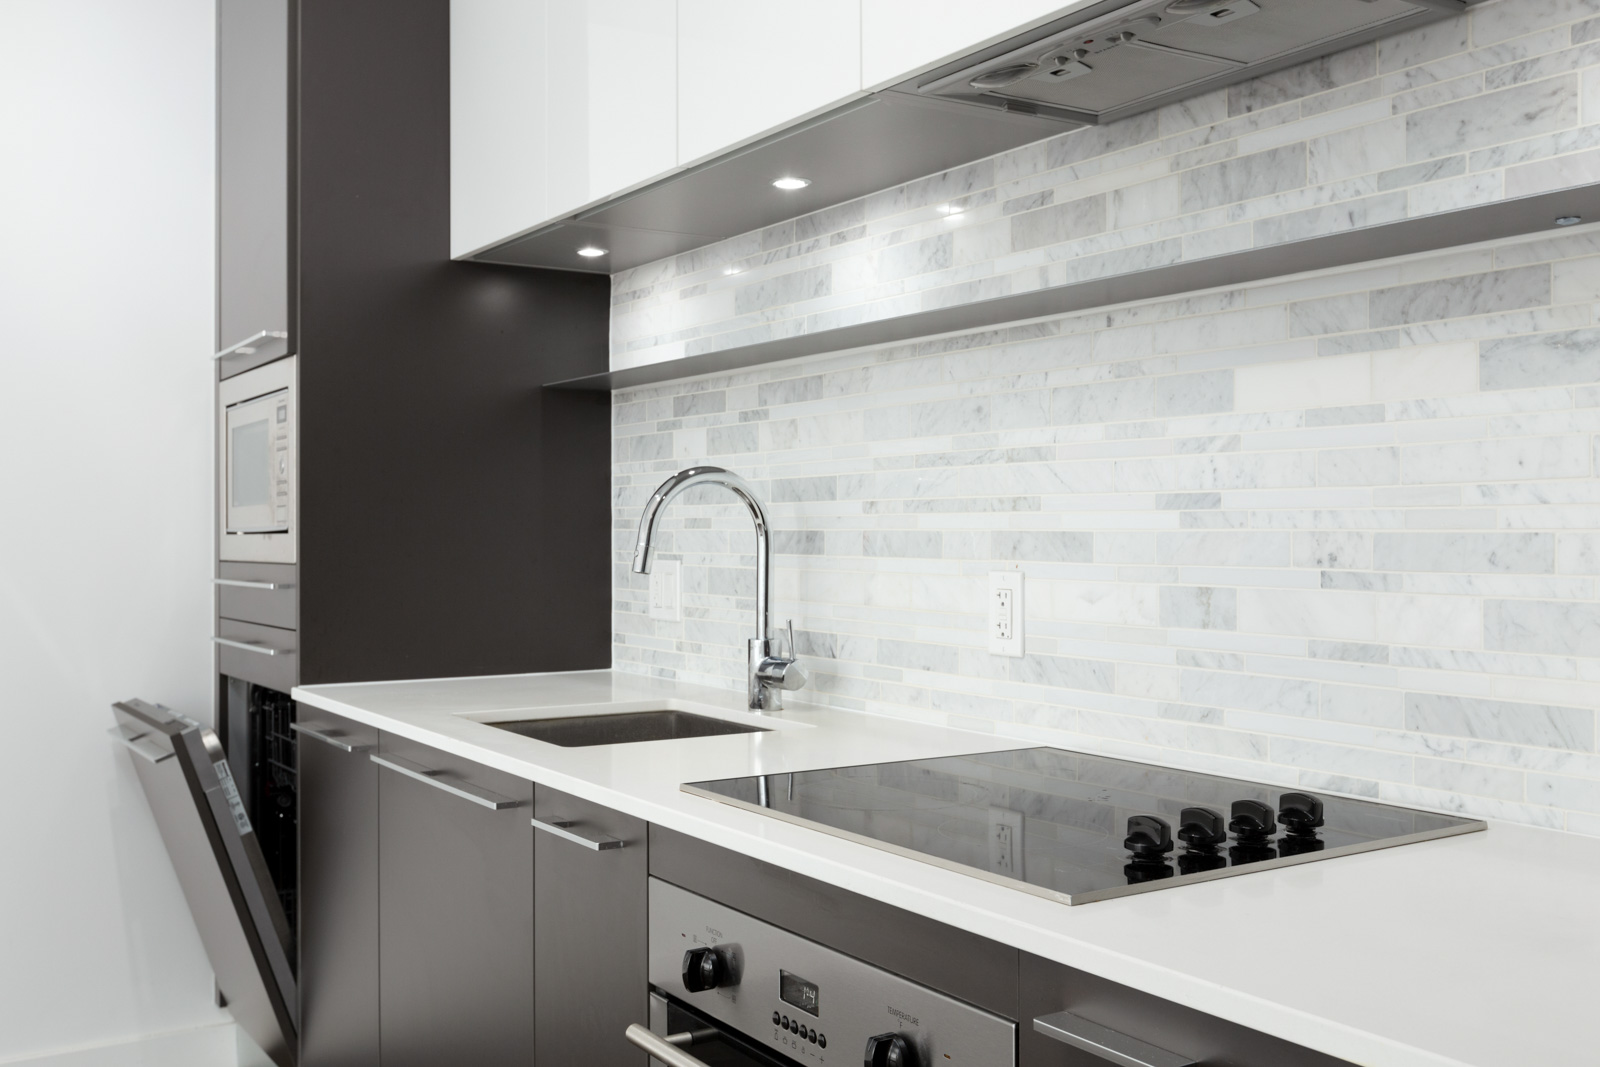 Sleek kitchen with a tiled backsplash and high-end appliances such as a dishwasher, microwave, stovetop on quartz countertops in a rental condo in Vancouver offered by Birds Nest Properties.